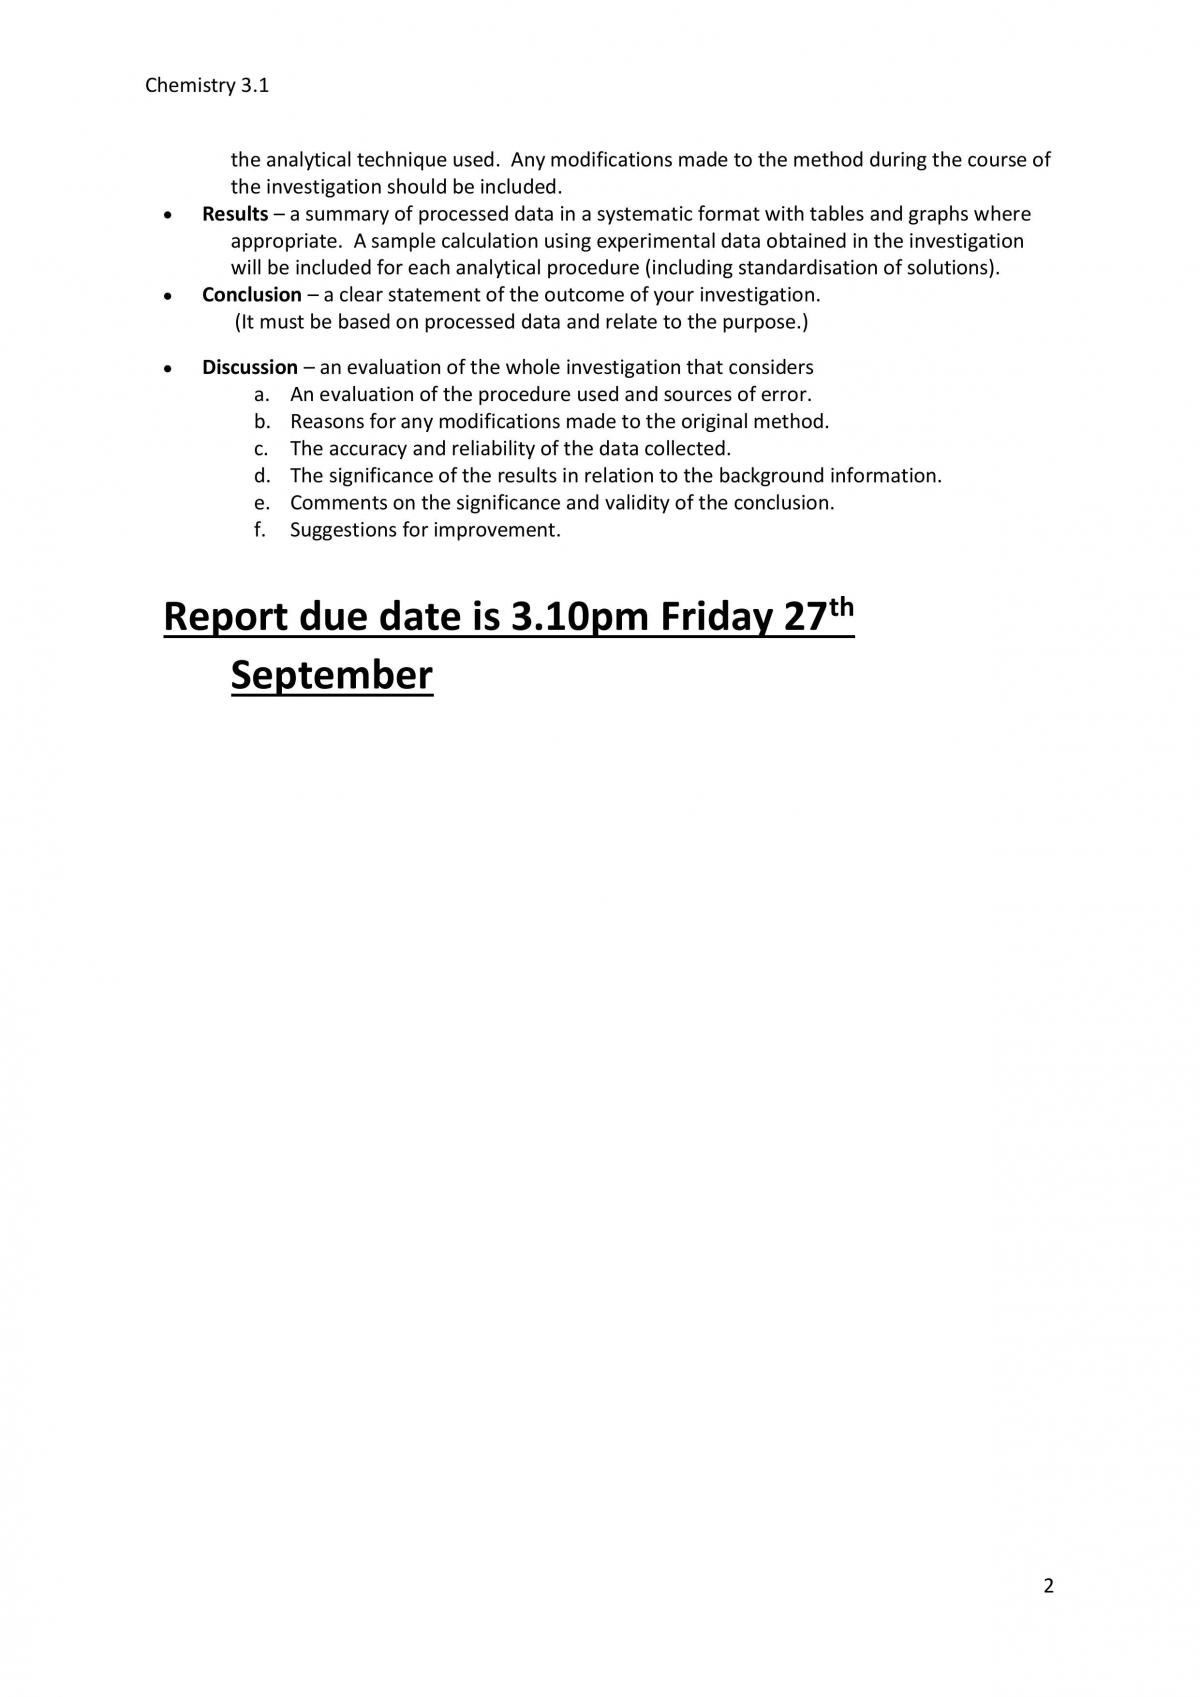 Carry out an investigation in chemistry involving quantitative analysis - Page 2